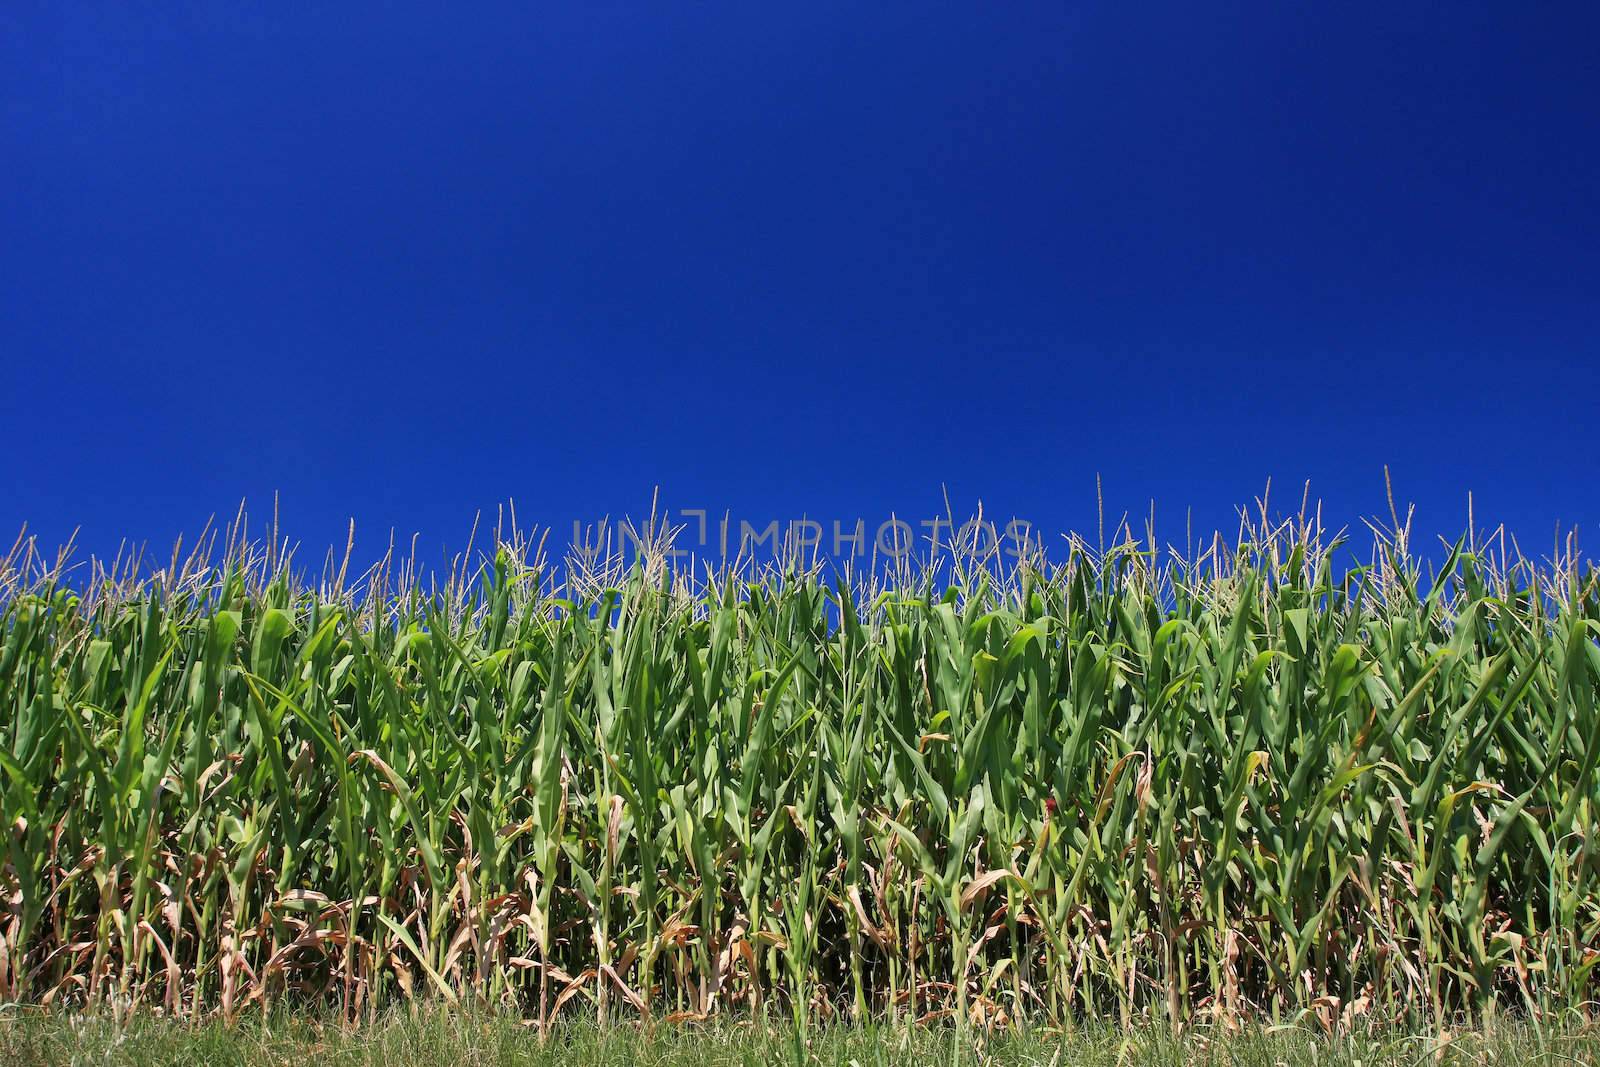 Maize corn field set against a wonderful blue sky, not a cloud in sight and the blue color a perfect uniform solid, Plenty of copy space perfect for your design